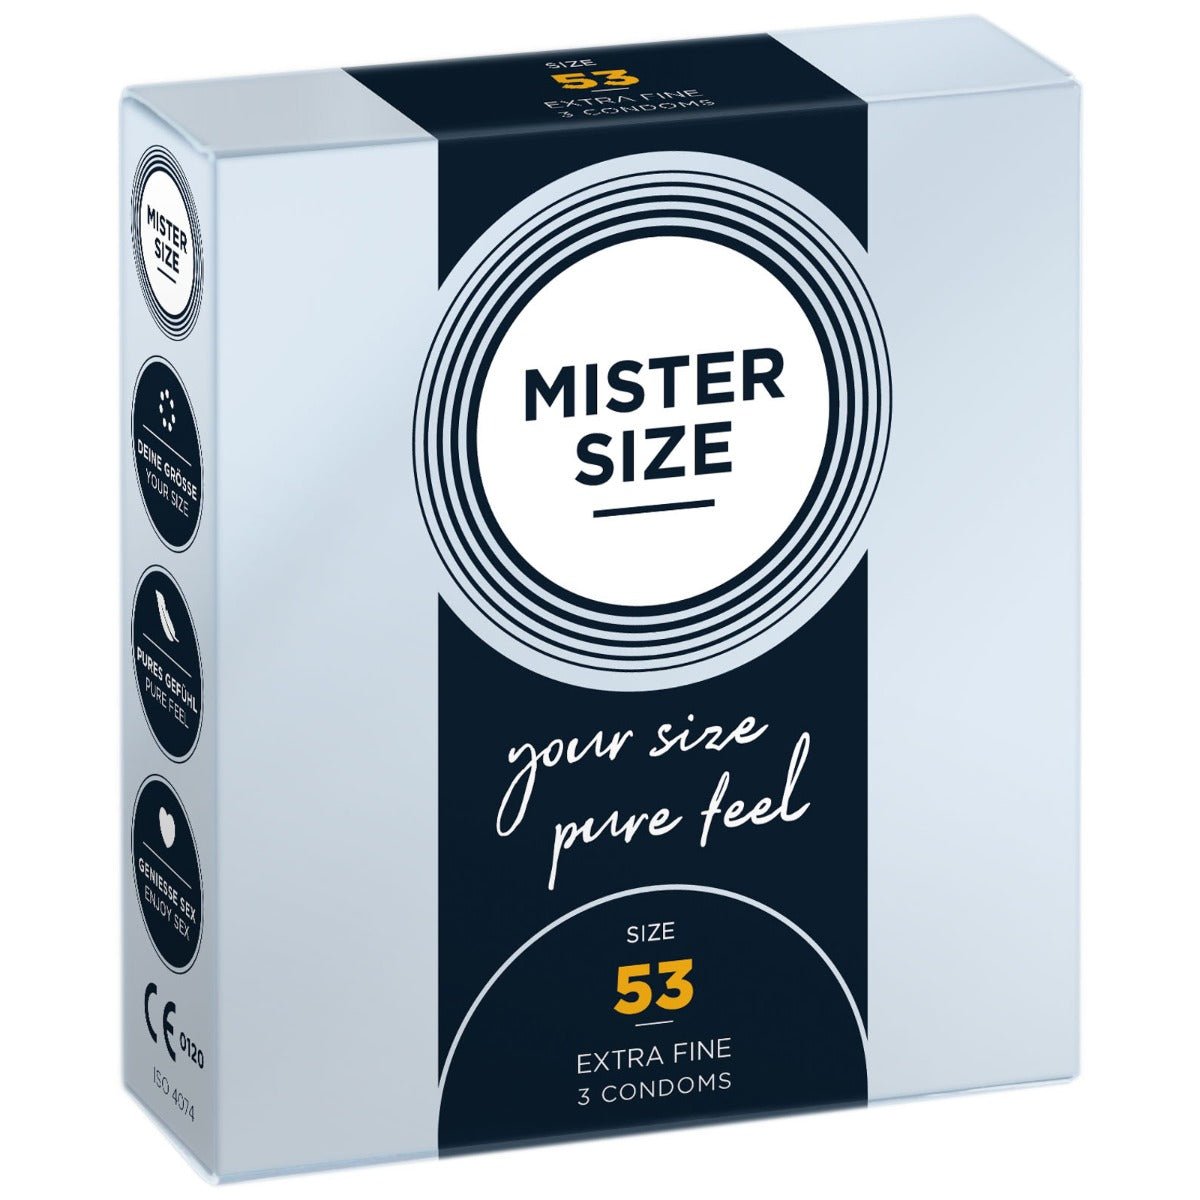 Condoms MISTER SIZE - pure feel Condoms - size 53 mm (3 pack)   